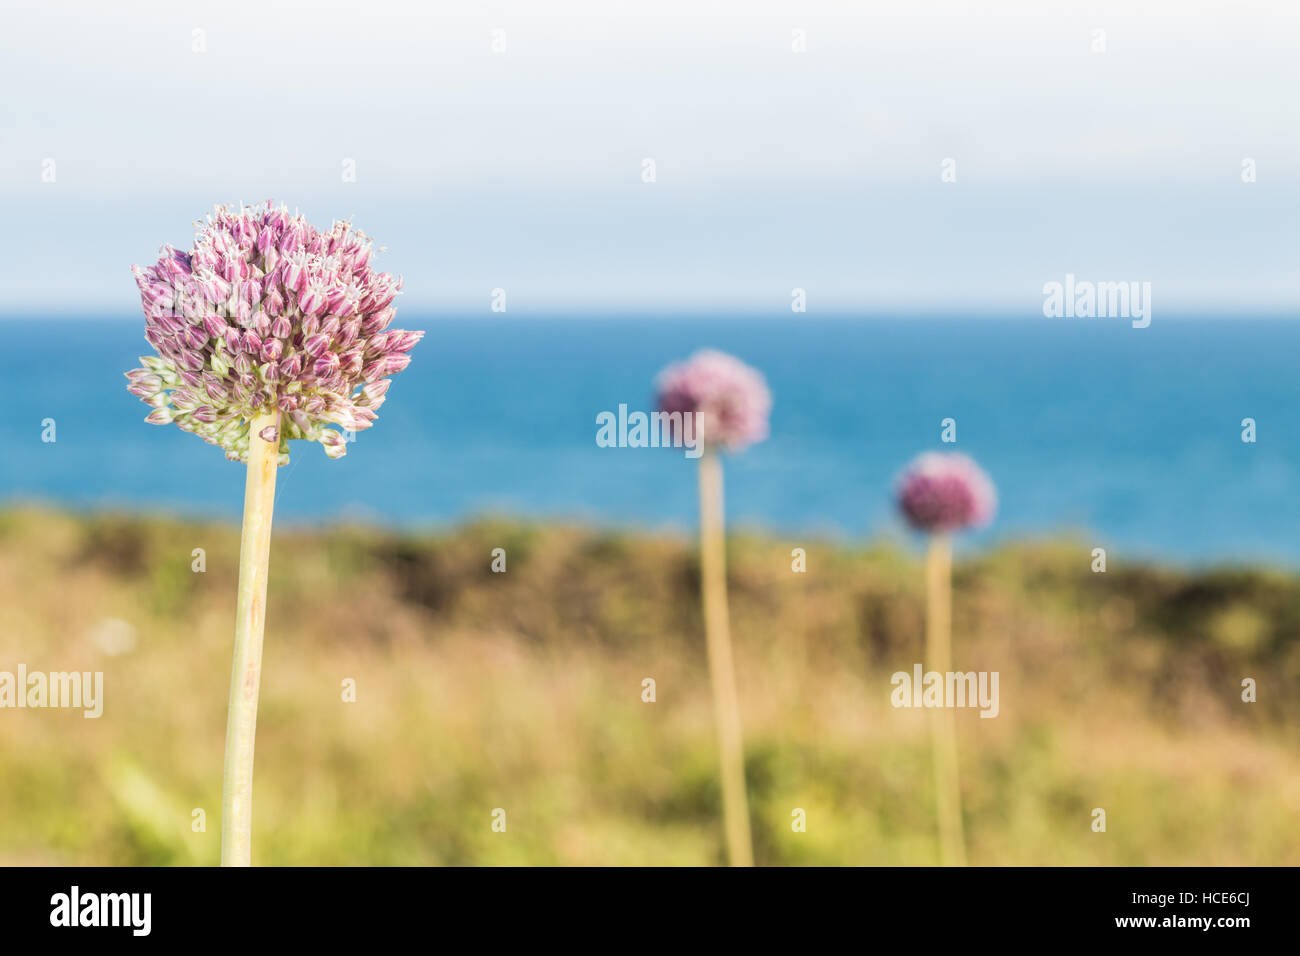 Wild Leek Allium ampeloprasum, several plants in flower in the coastal environment of St Mary's, Isles of Scilly, UK, July Stock Photo